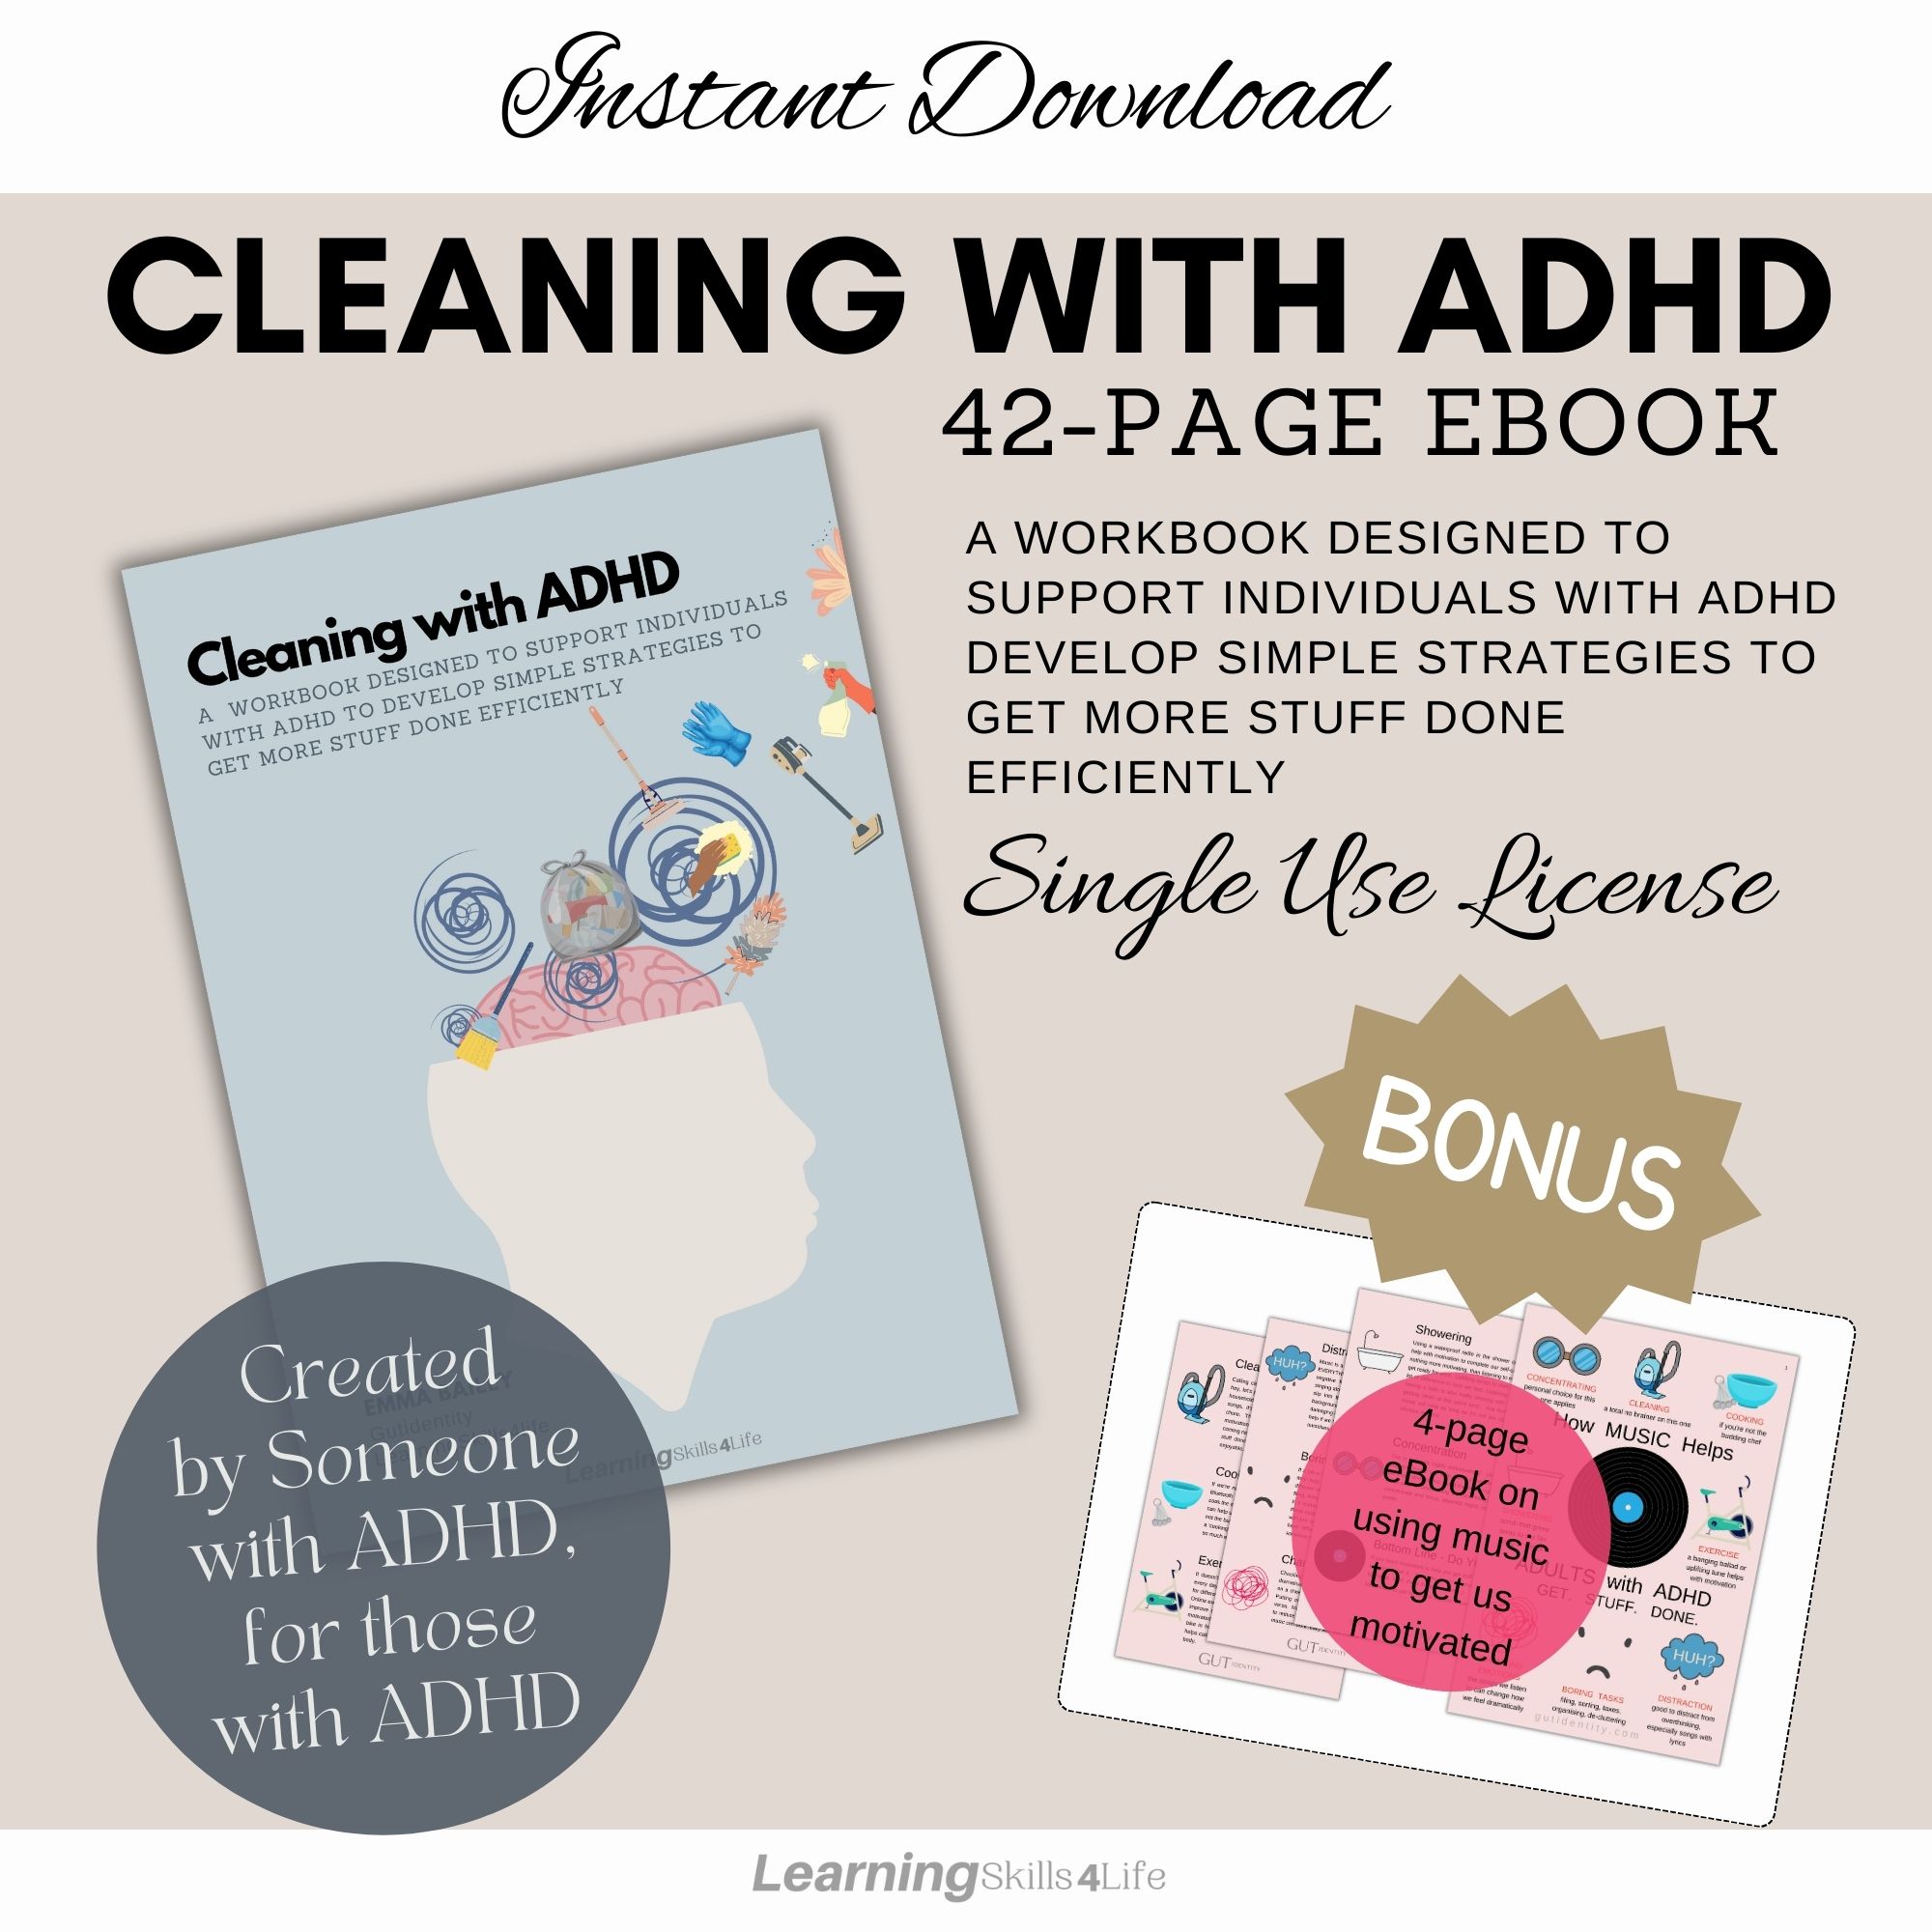 Cleaning with ADHD Workbook and Planners by Gutidentity and LearningSkills4Life